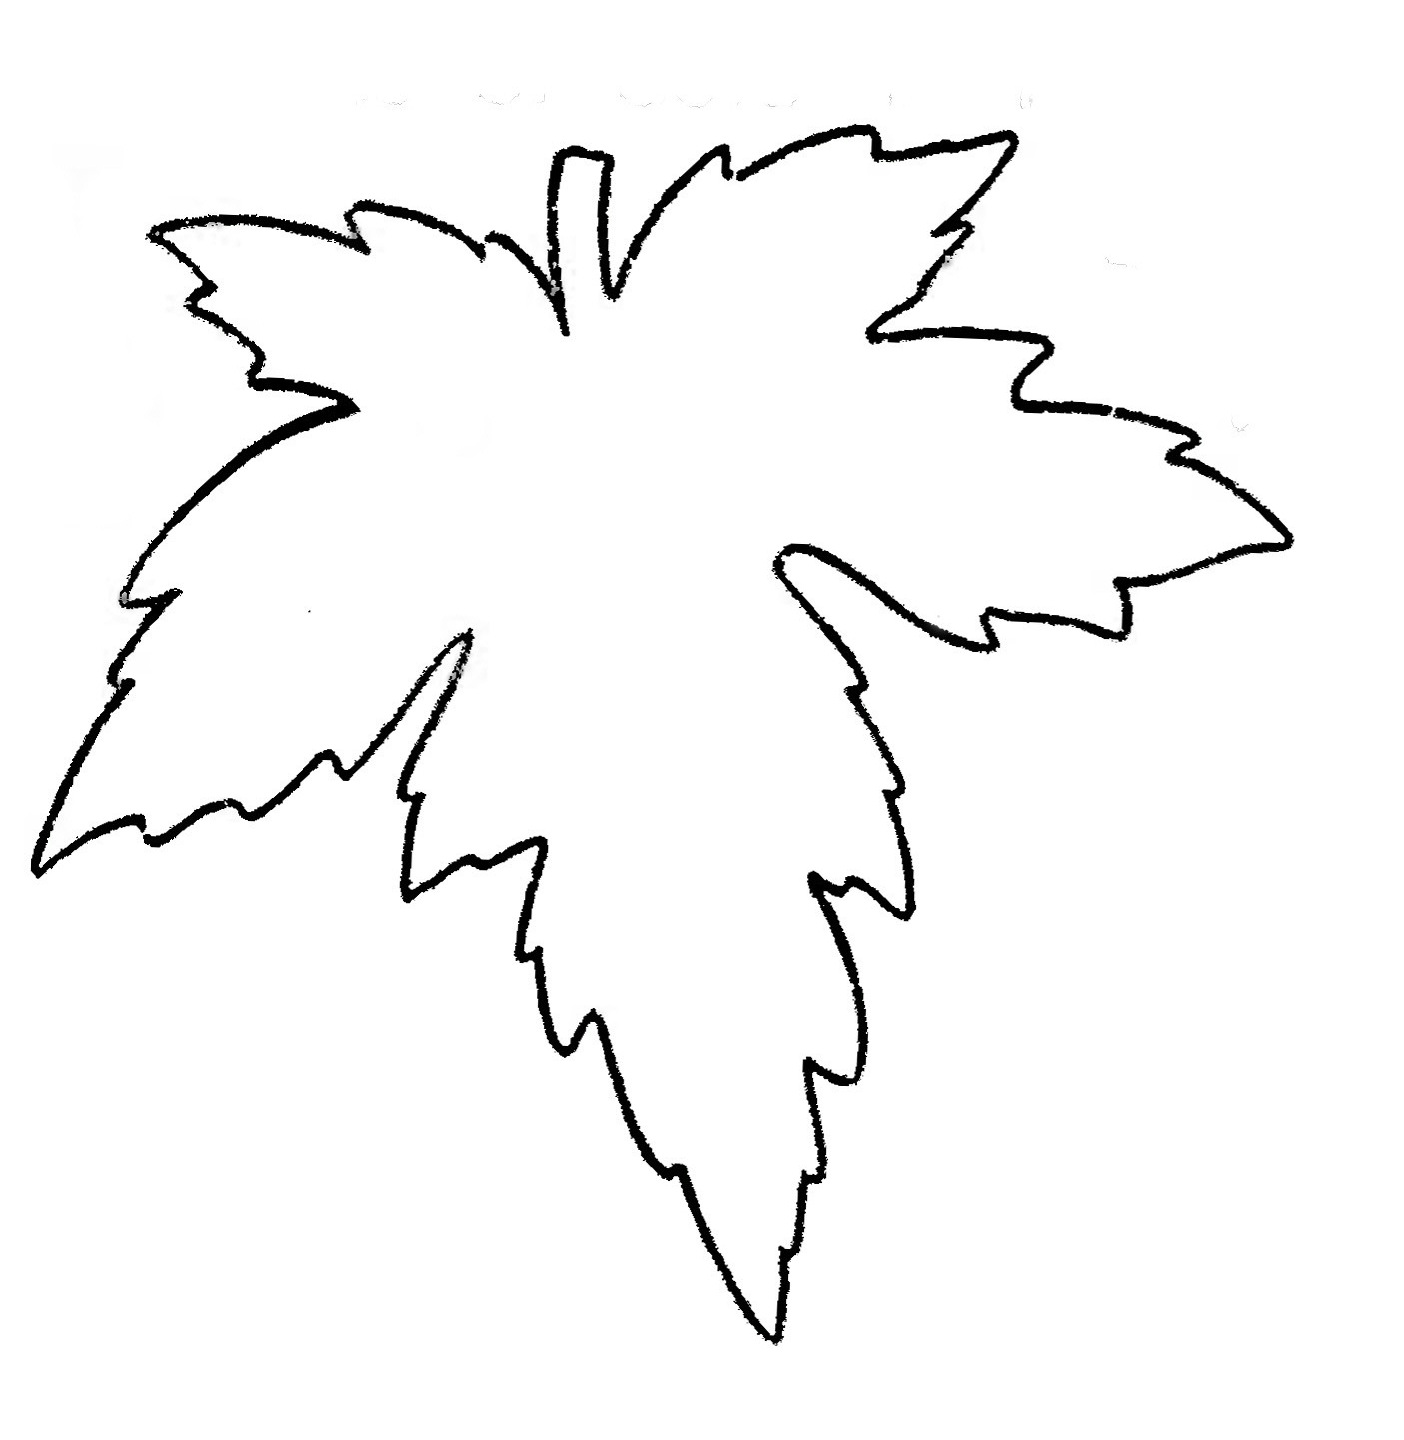 Autumn Leaf Coloring Pages | Coloring Page